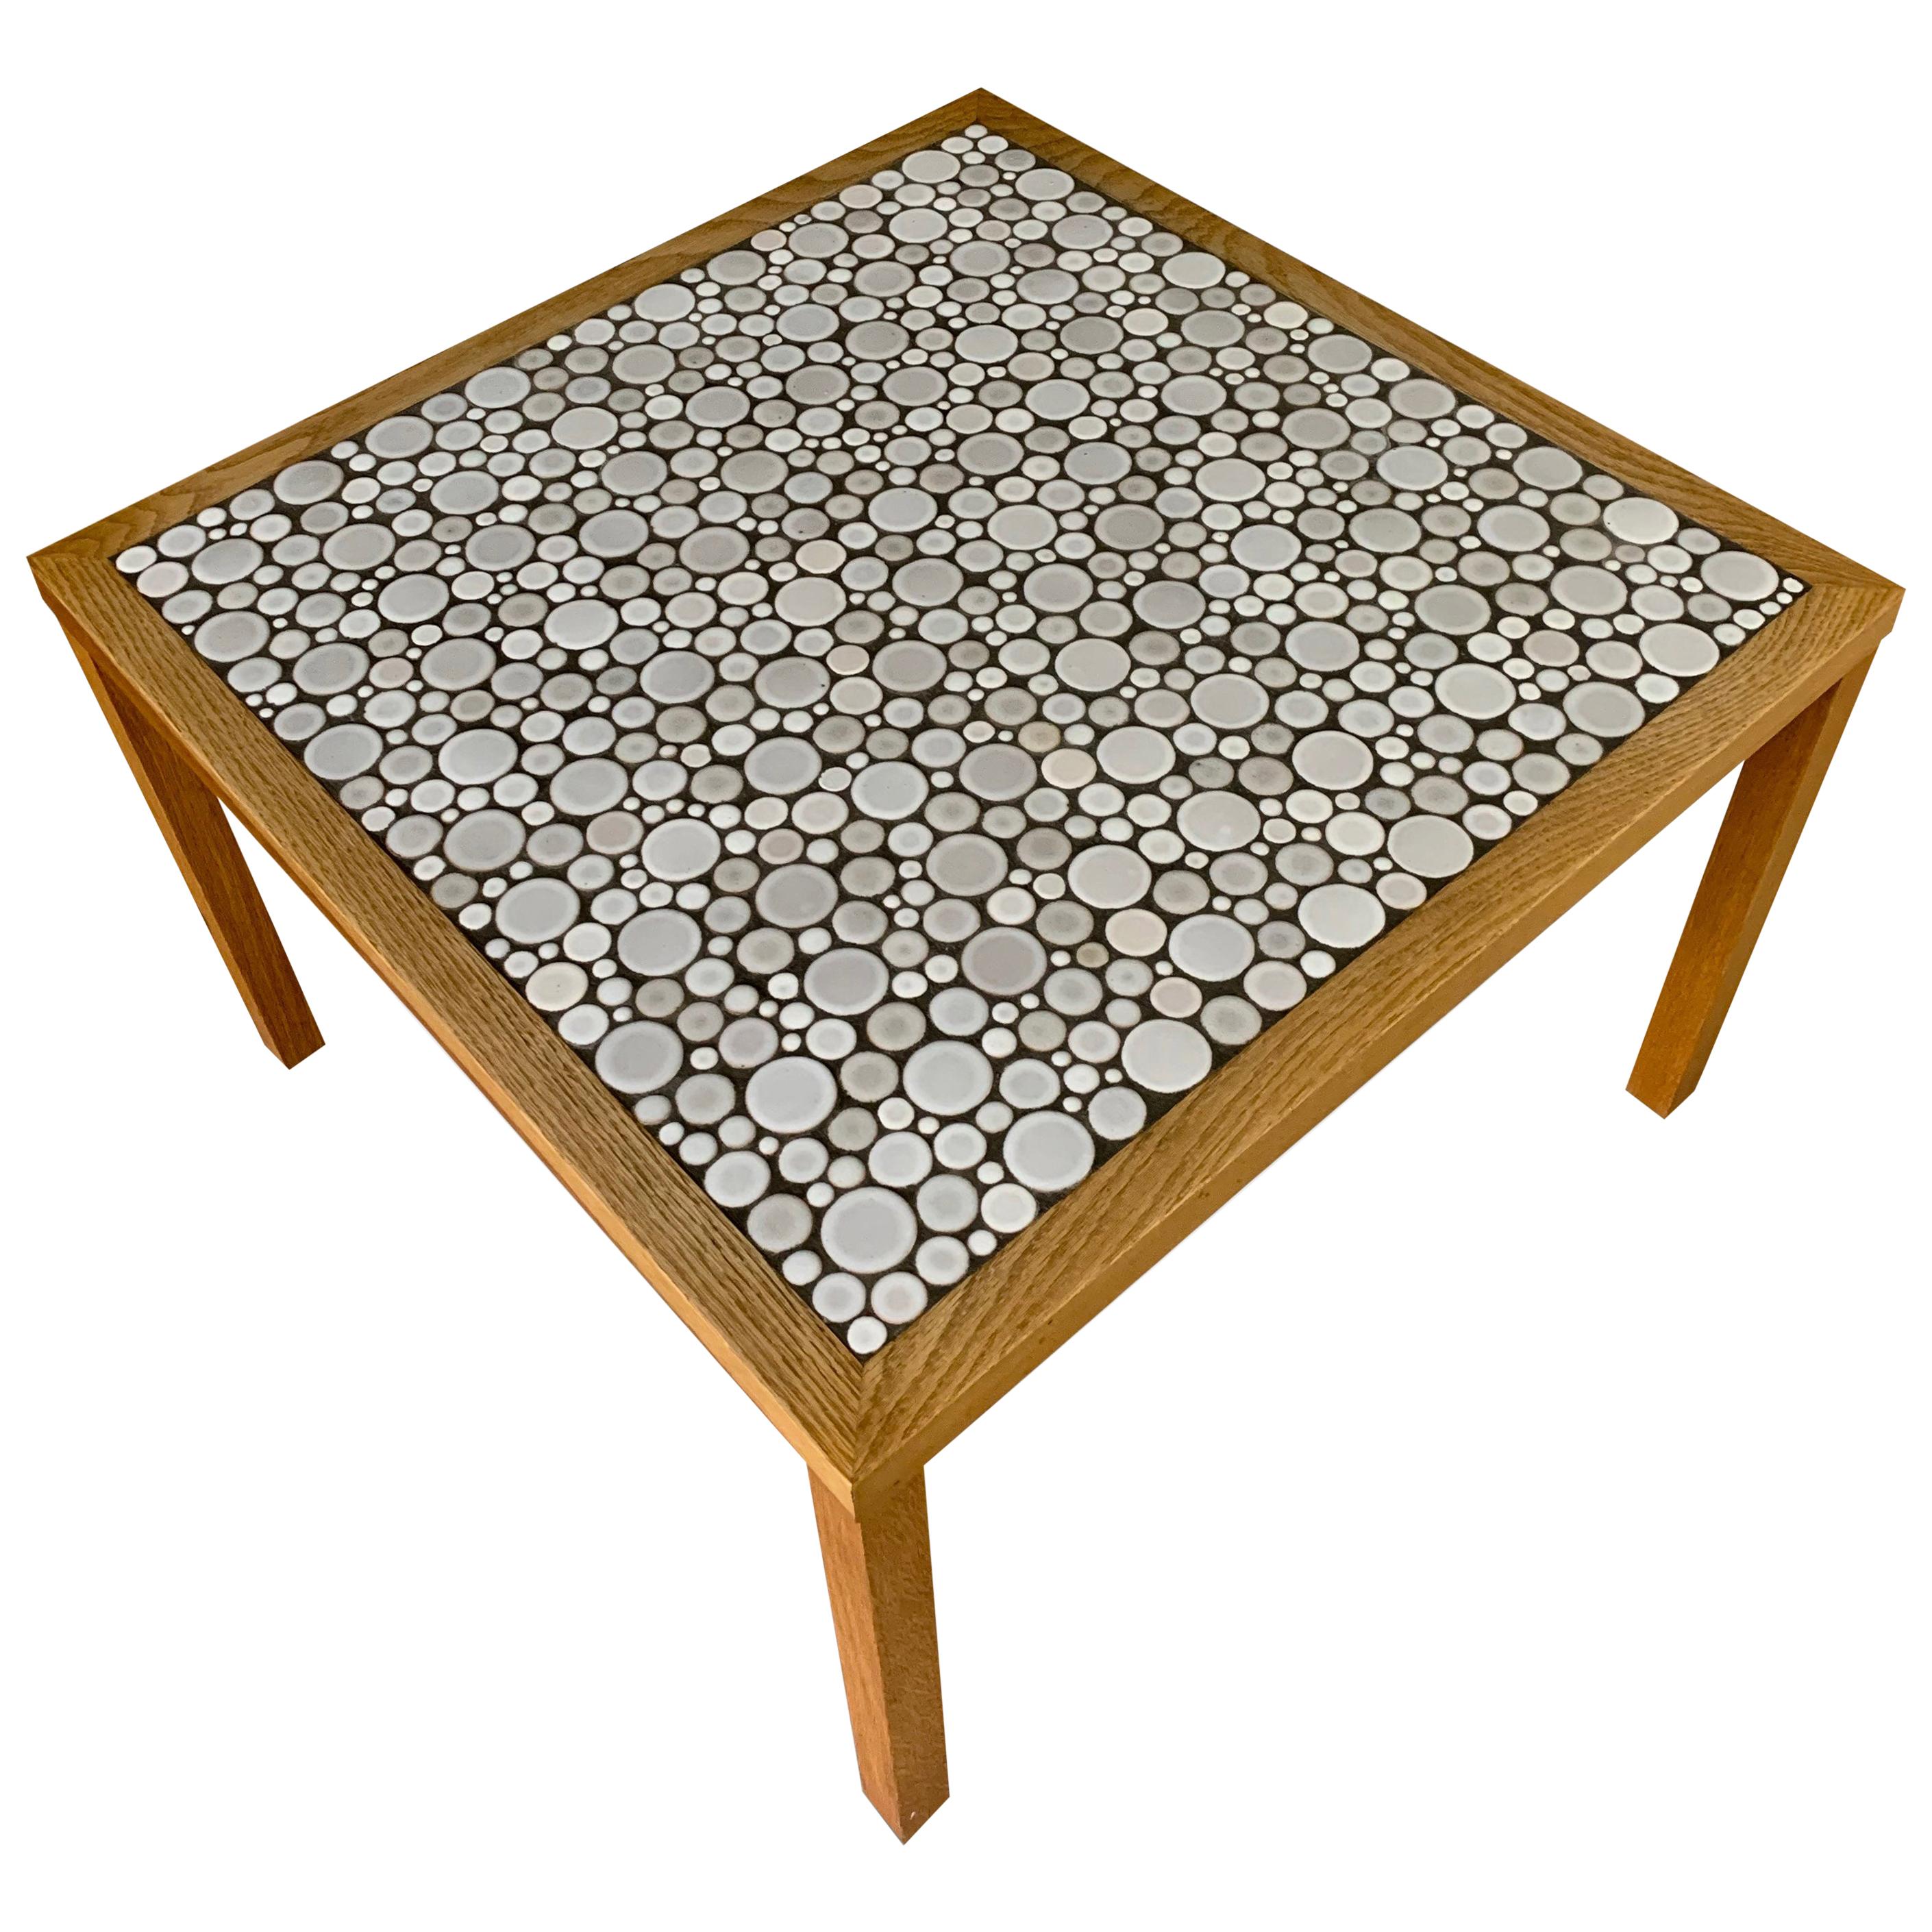 Martz Square Coffee Table in White Ceramic Circular Tiles Set in Charcoal Grout For Sale